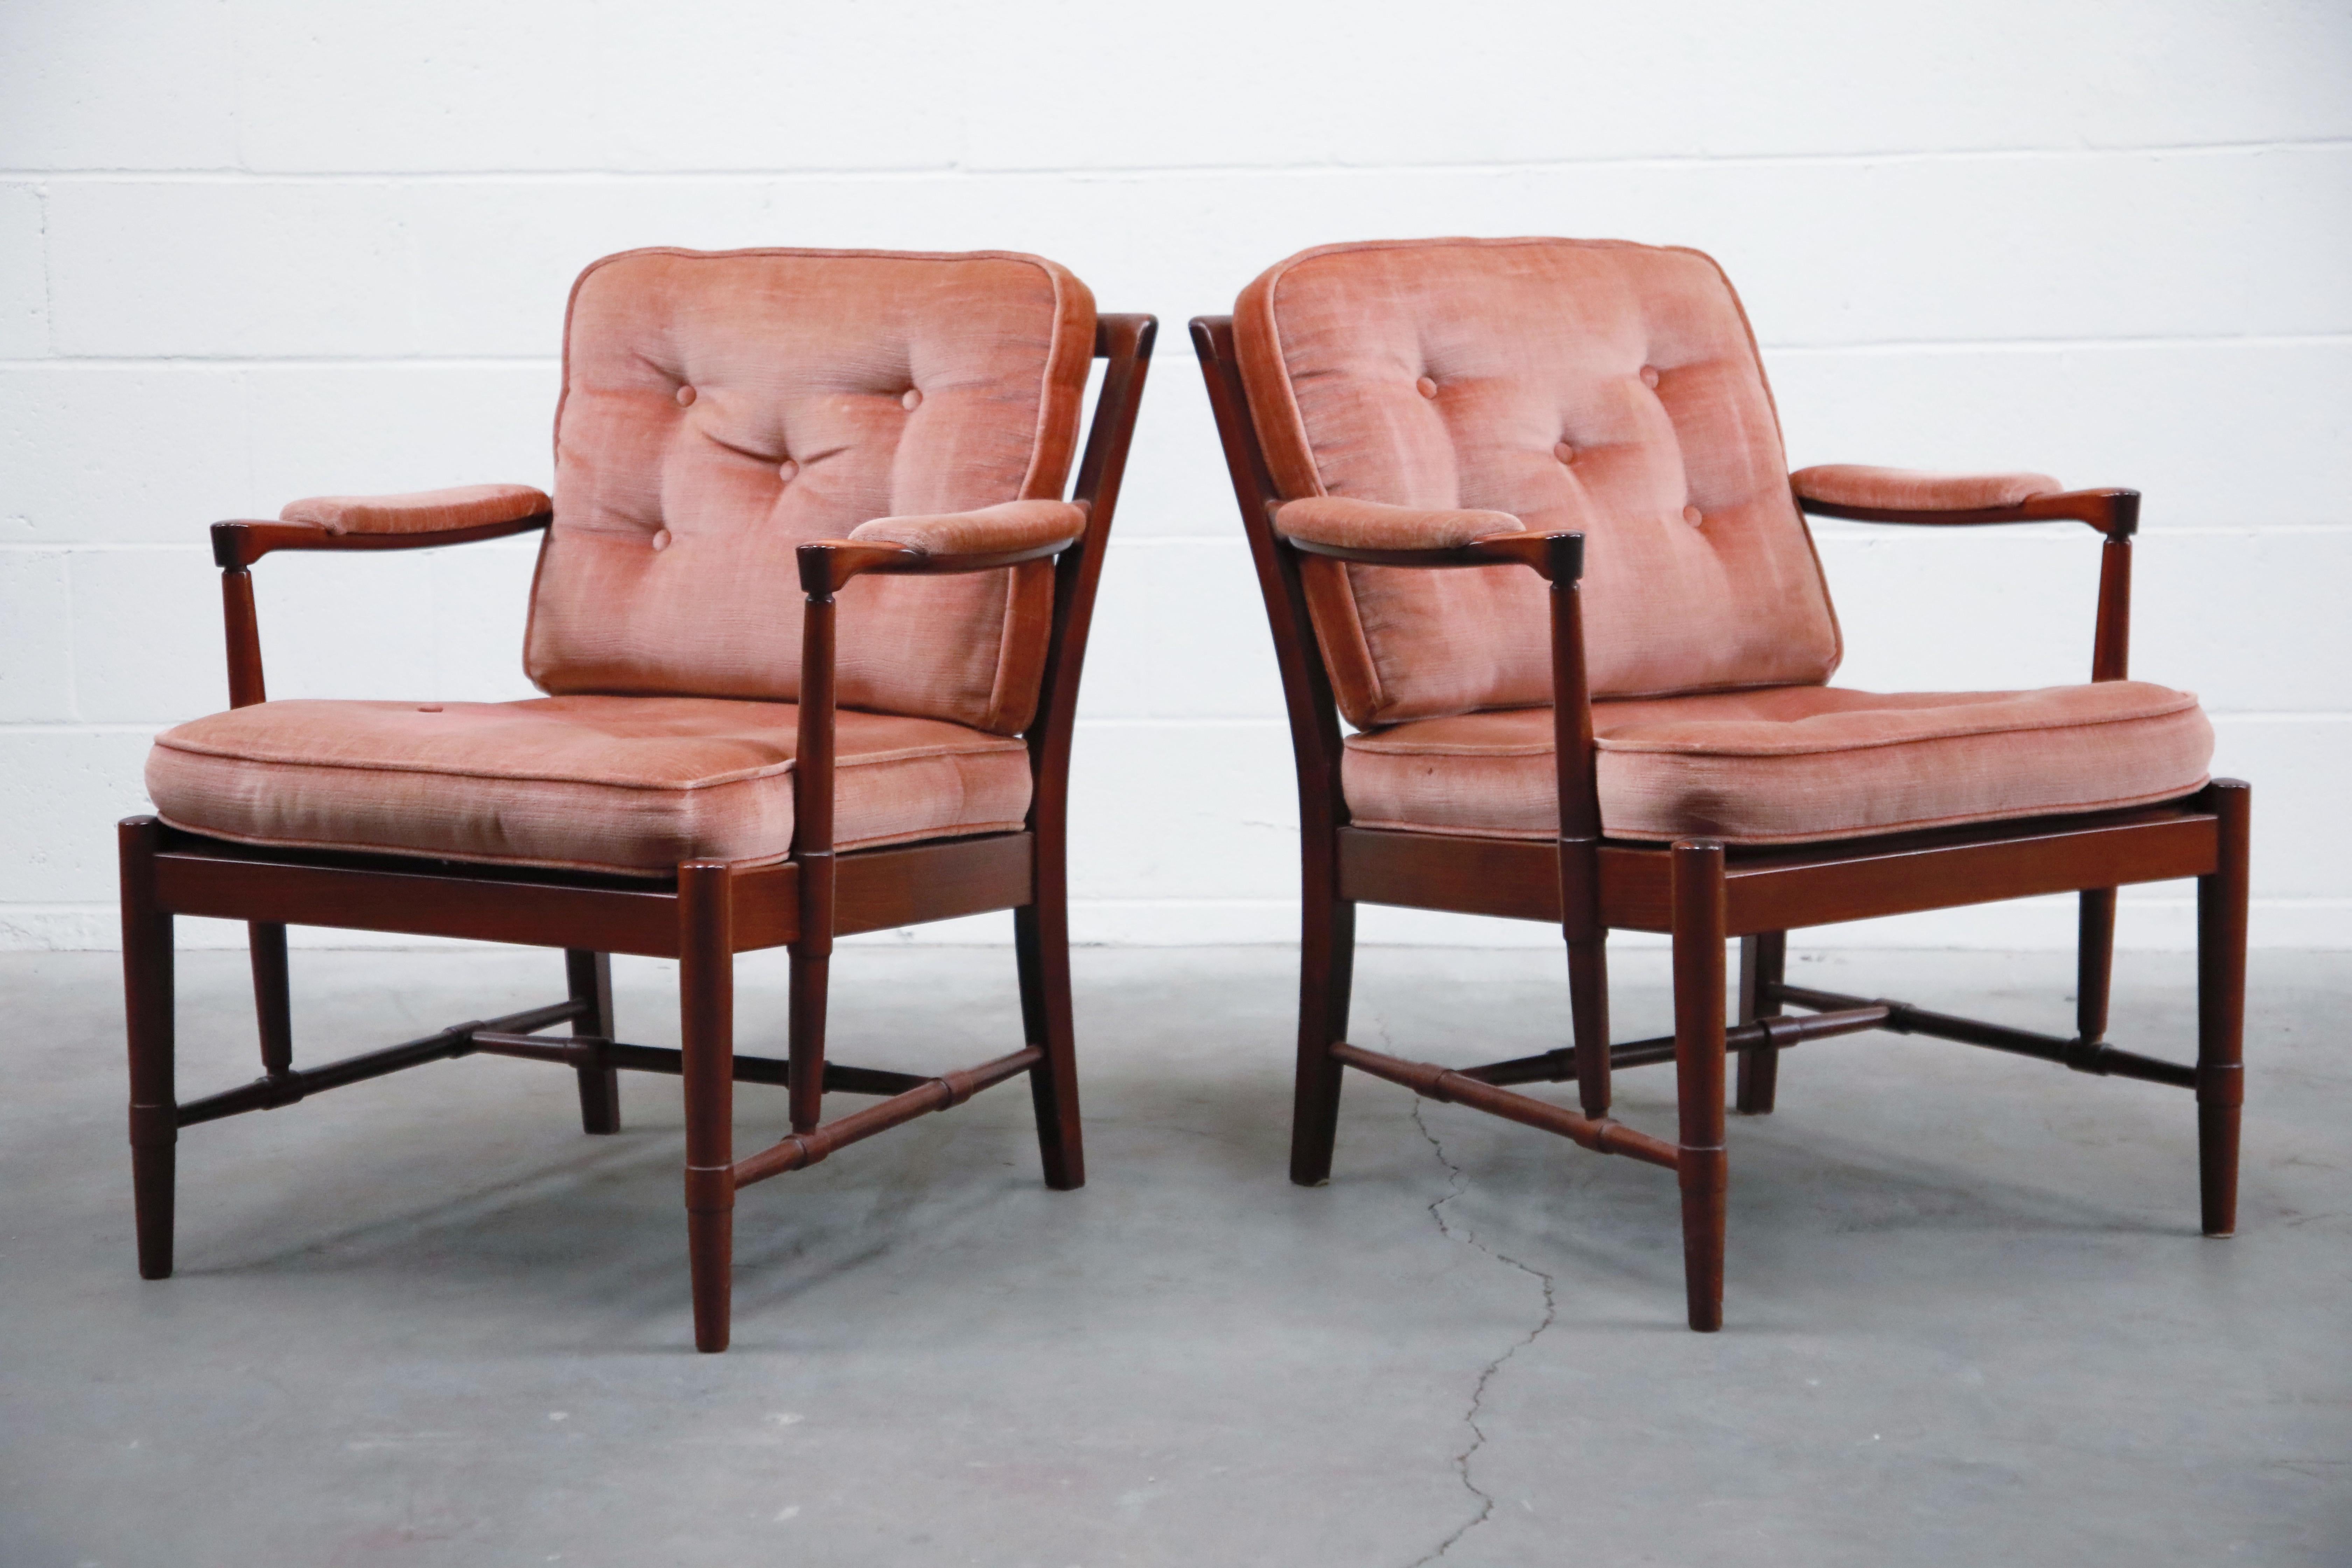 Scandinavian Modern Pair of Pink Velvet and Rosewood Armchairs by Aksel Sorensen, 1970s, Signed